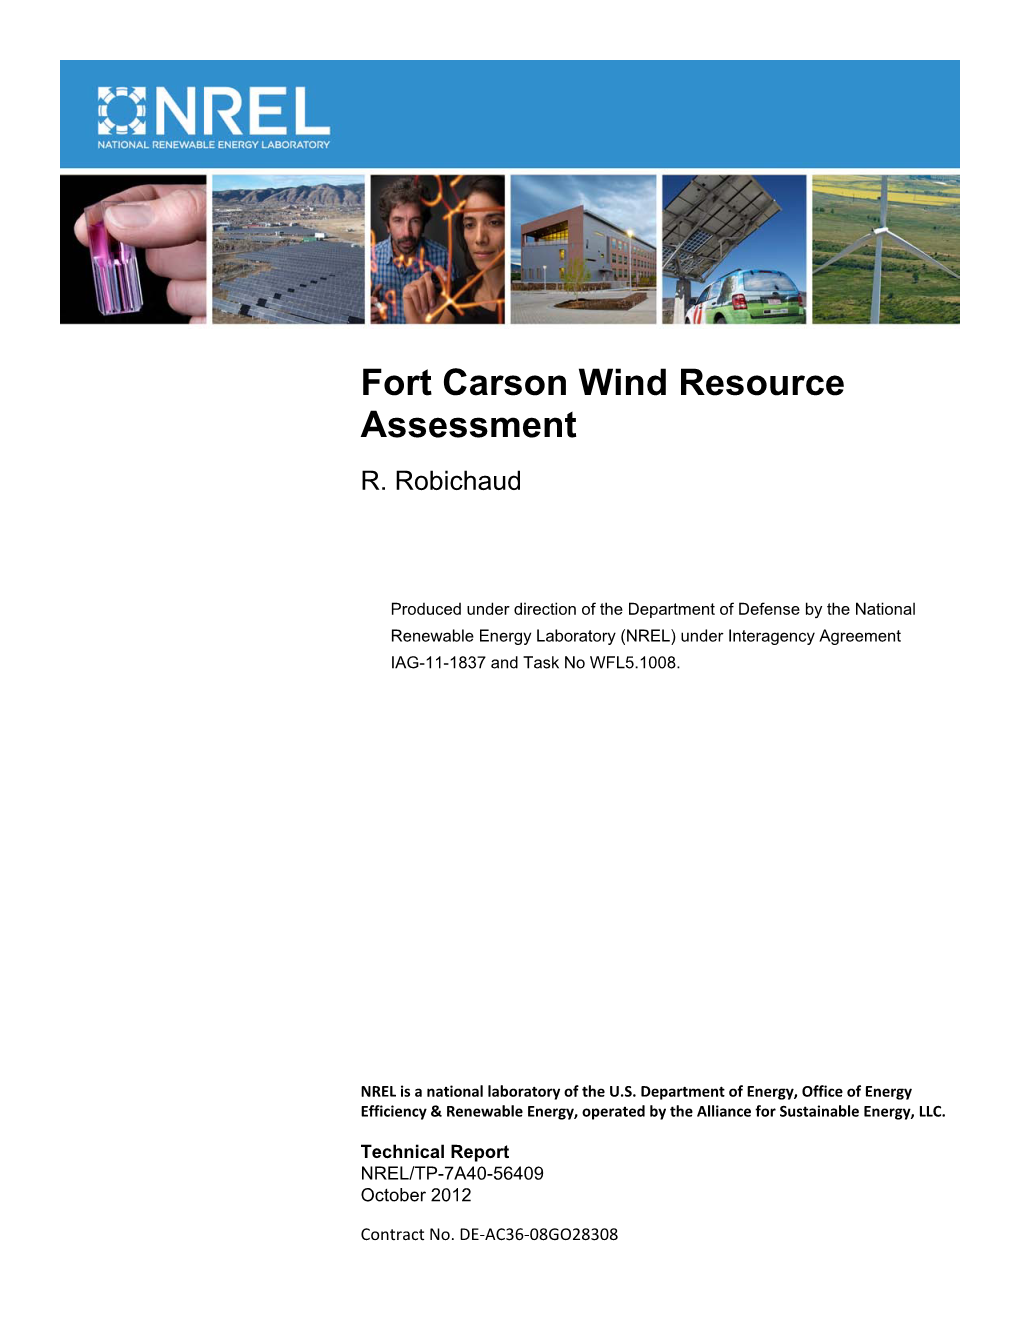 Fort Carson Wind Resource Assessment